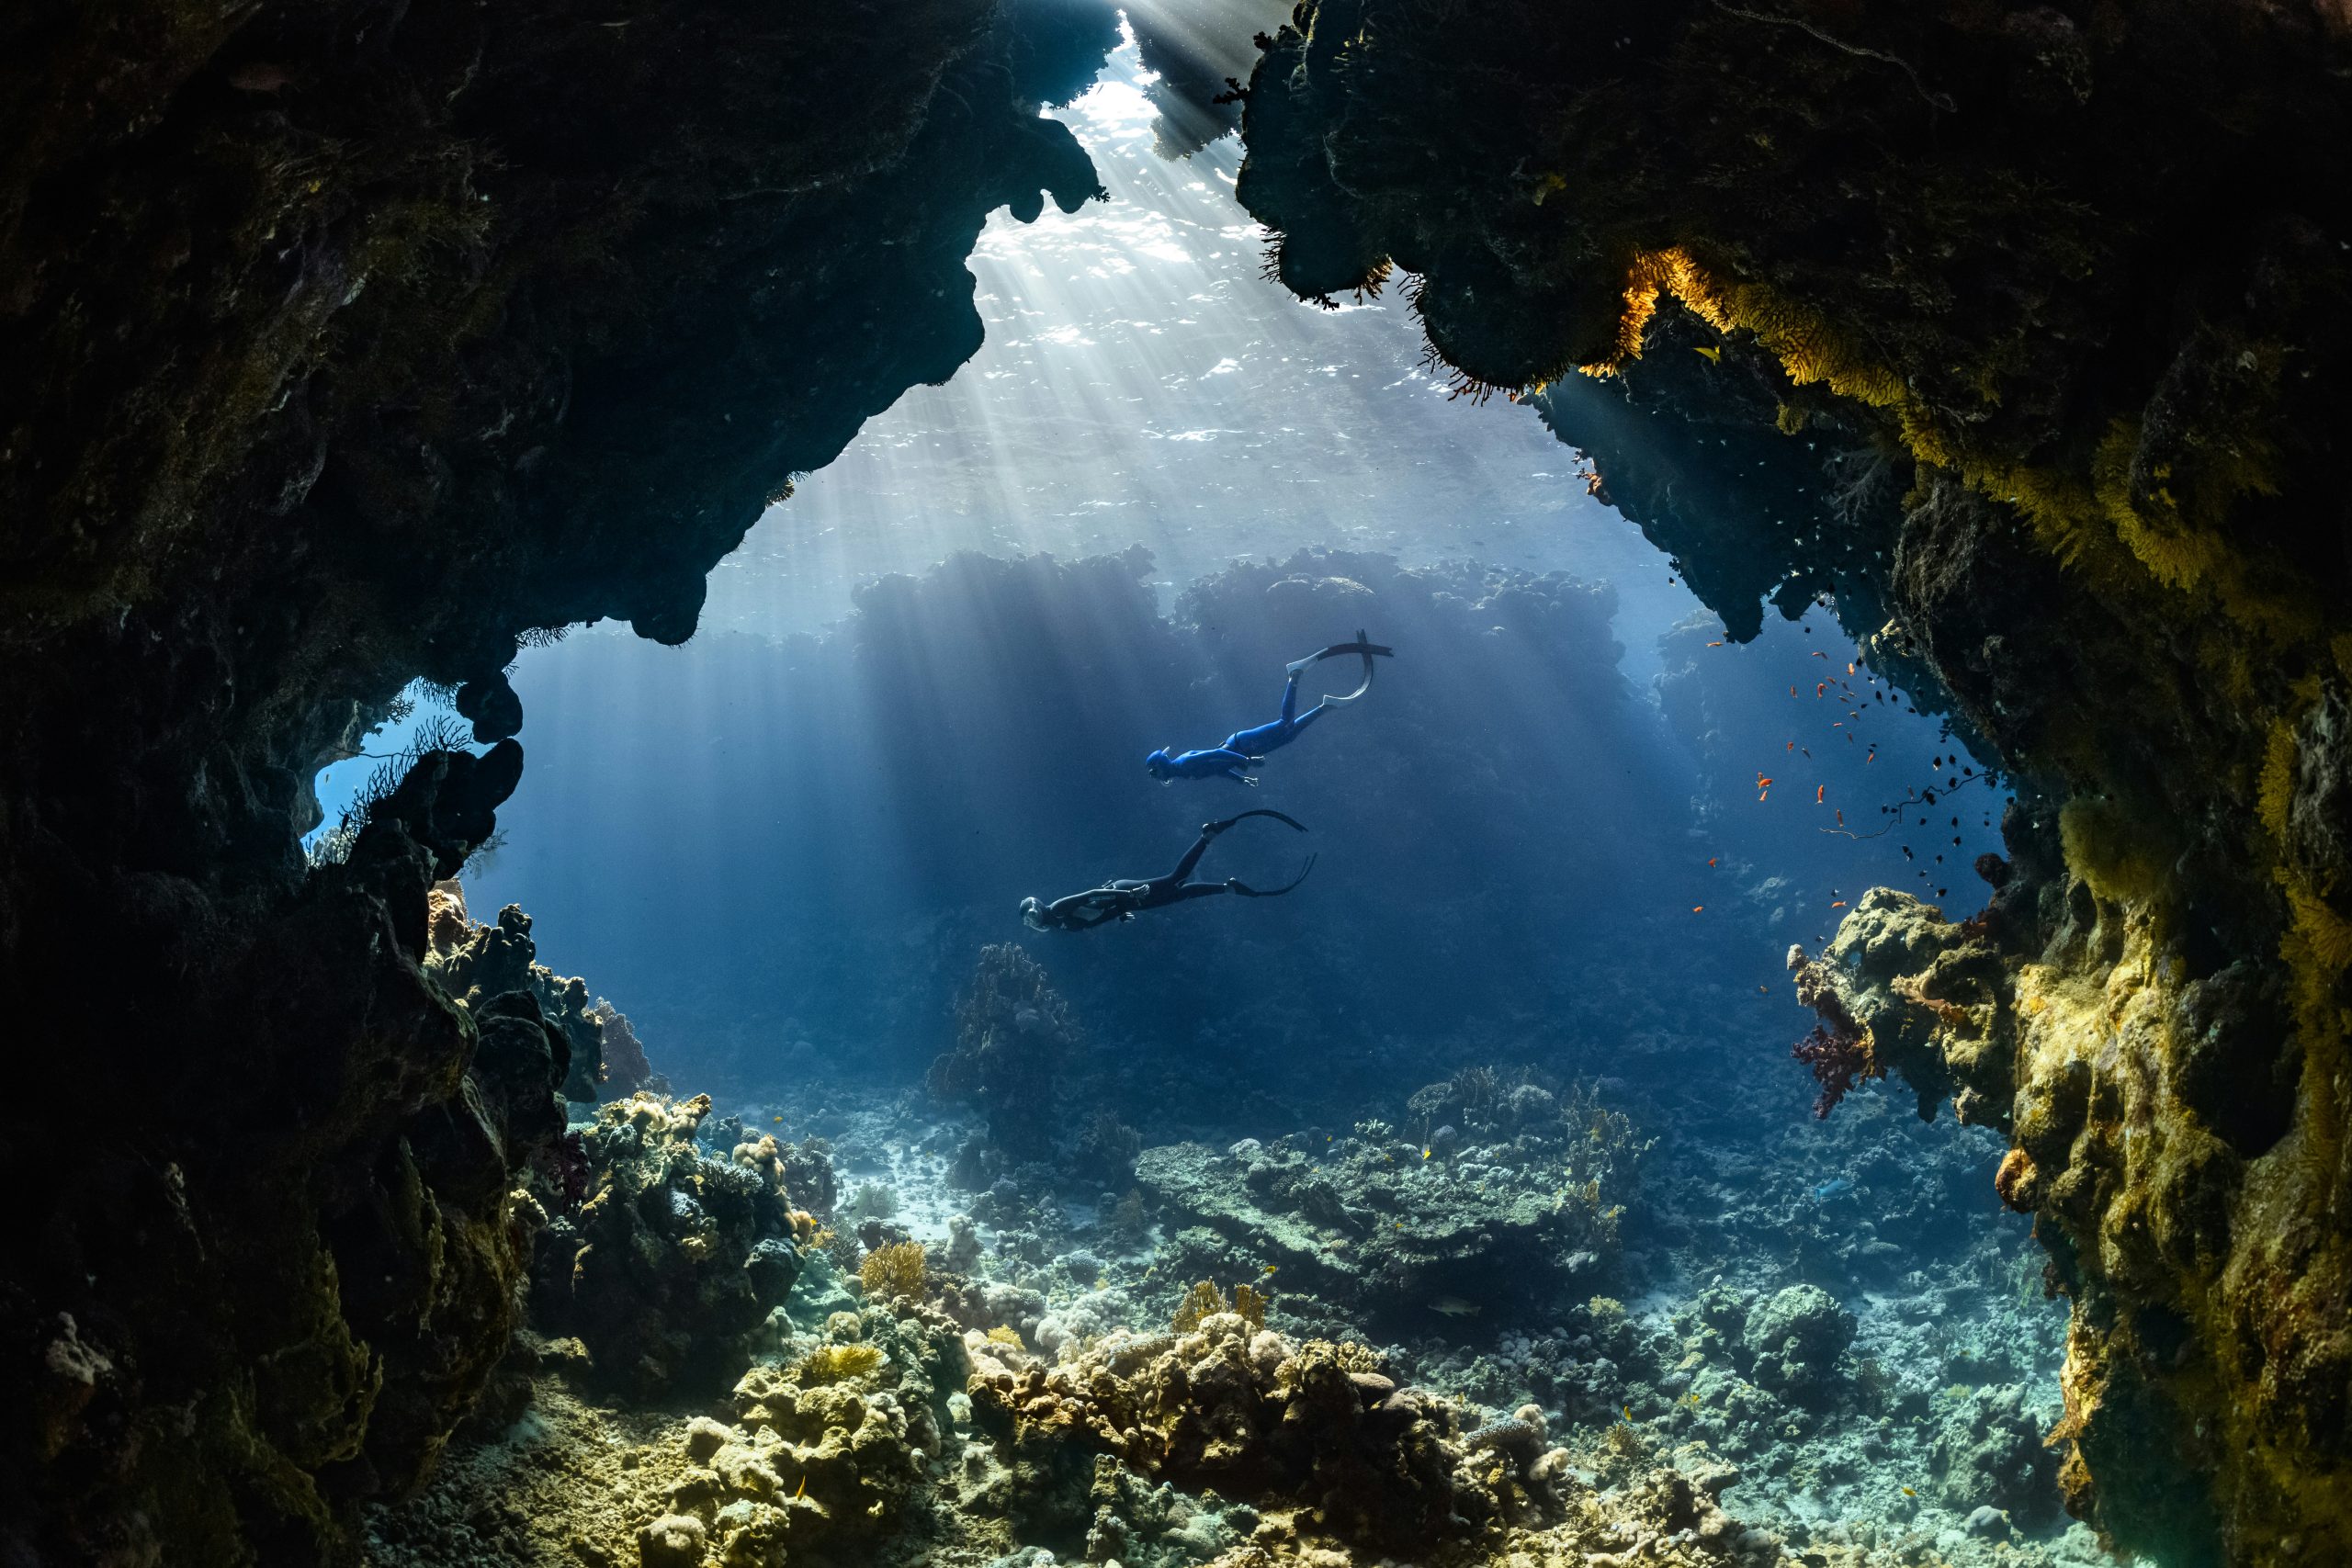 explore exciting oceanic quests and adventures in this immersive experience. dive into underwater worlds and uncover hidden treasures in oceanic quests.